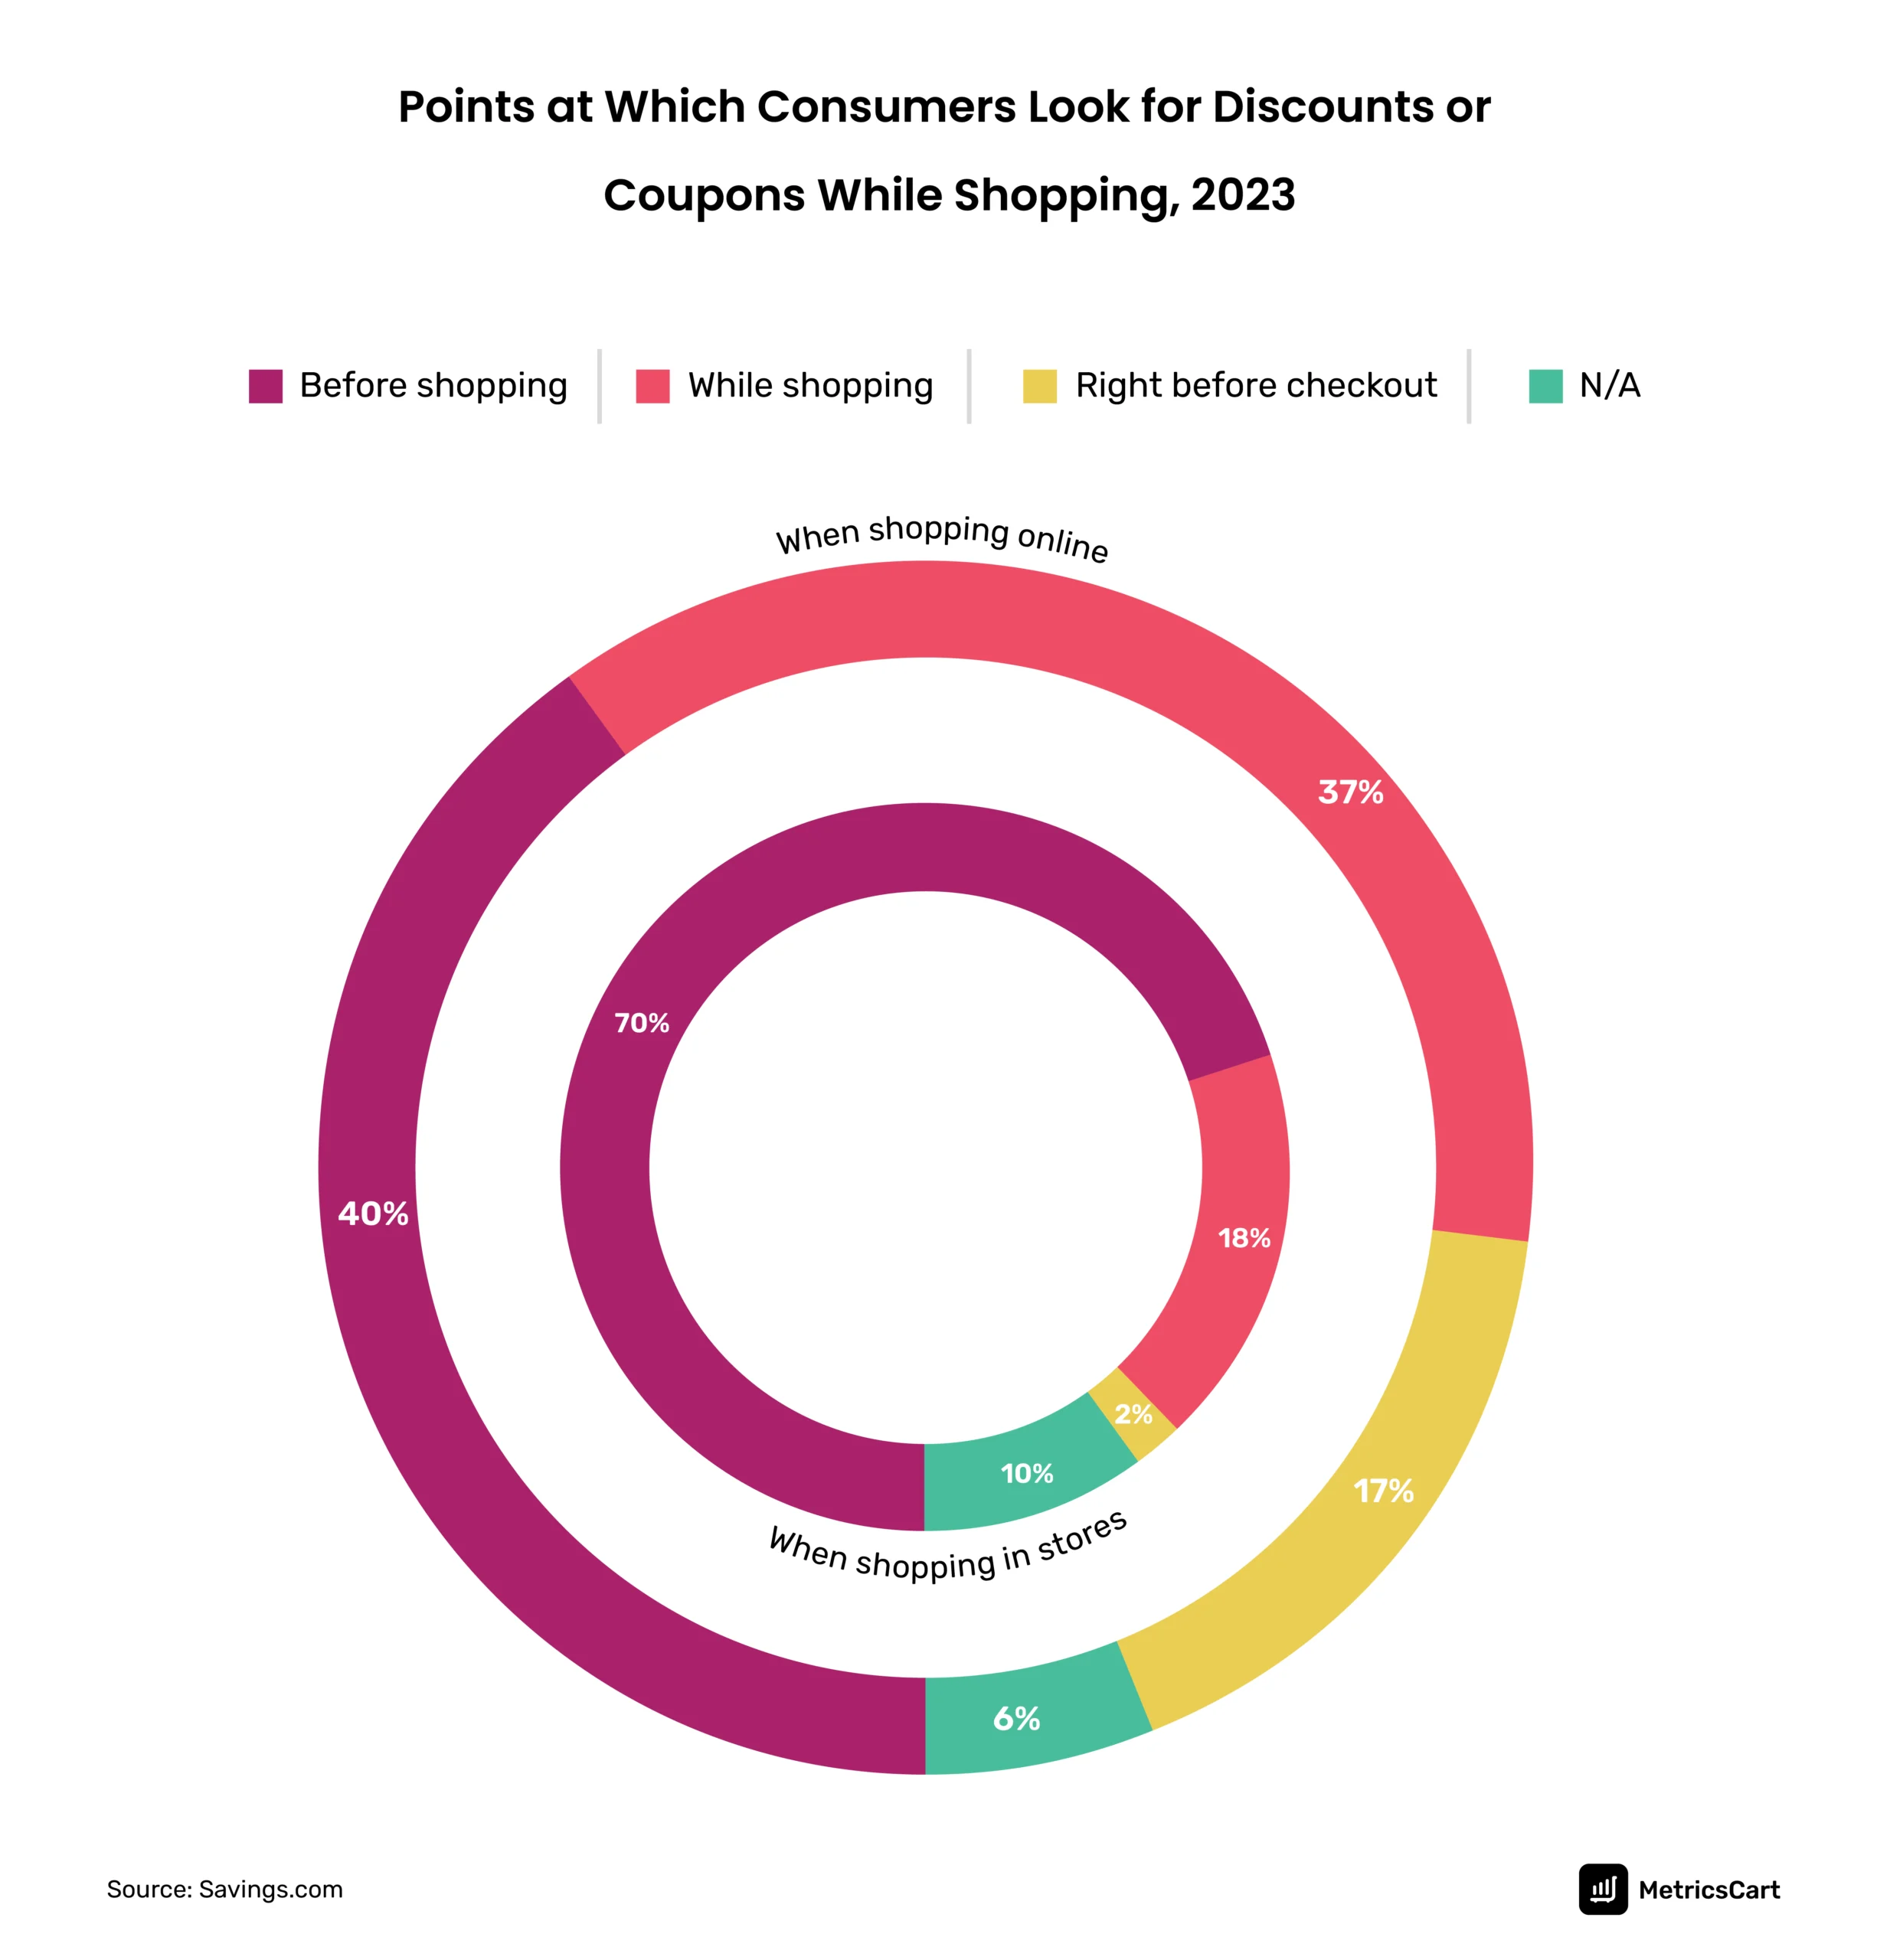 Statistical data that shows the points at which consumers search for discounts during shopping online and in-store.